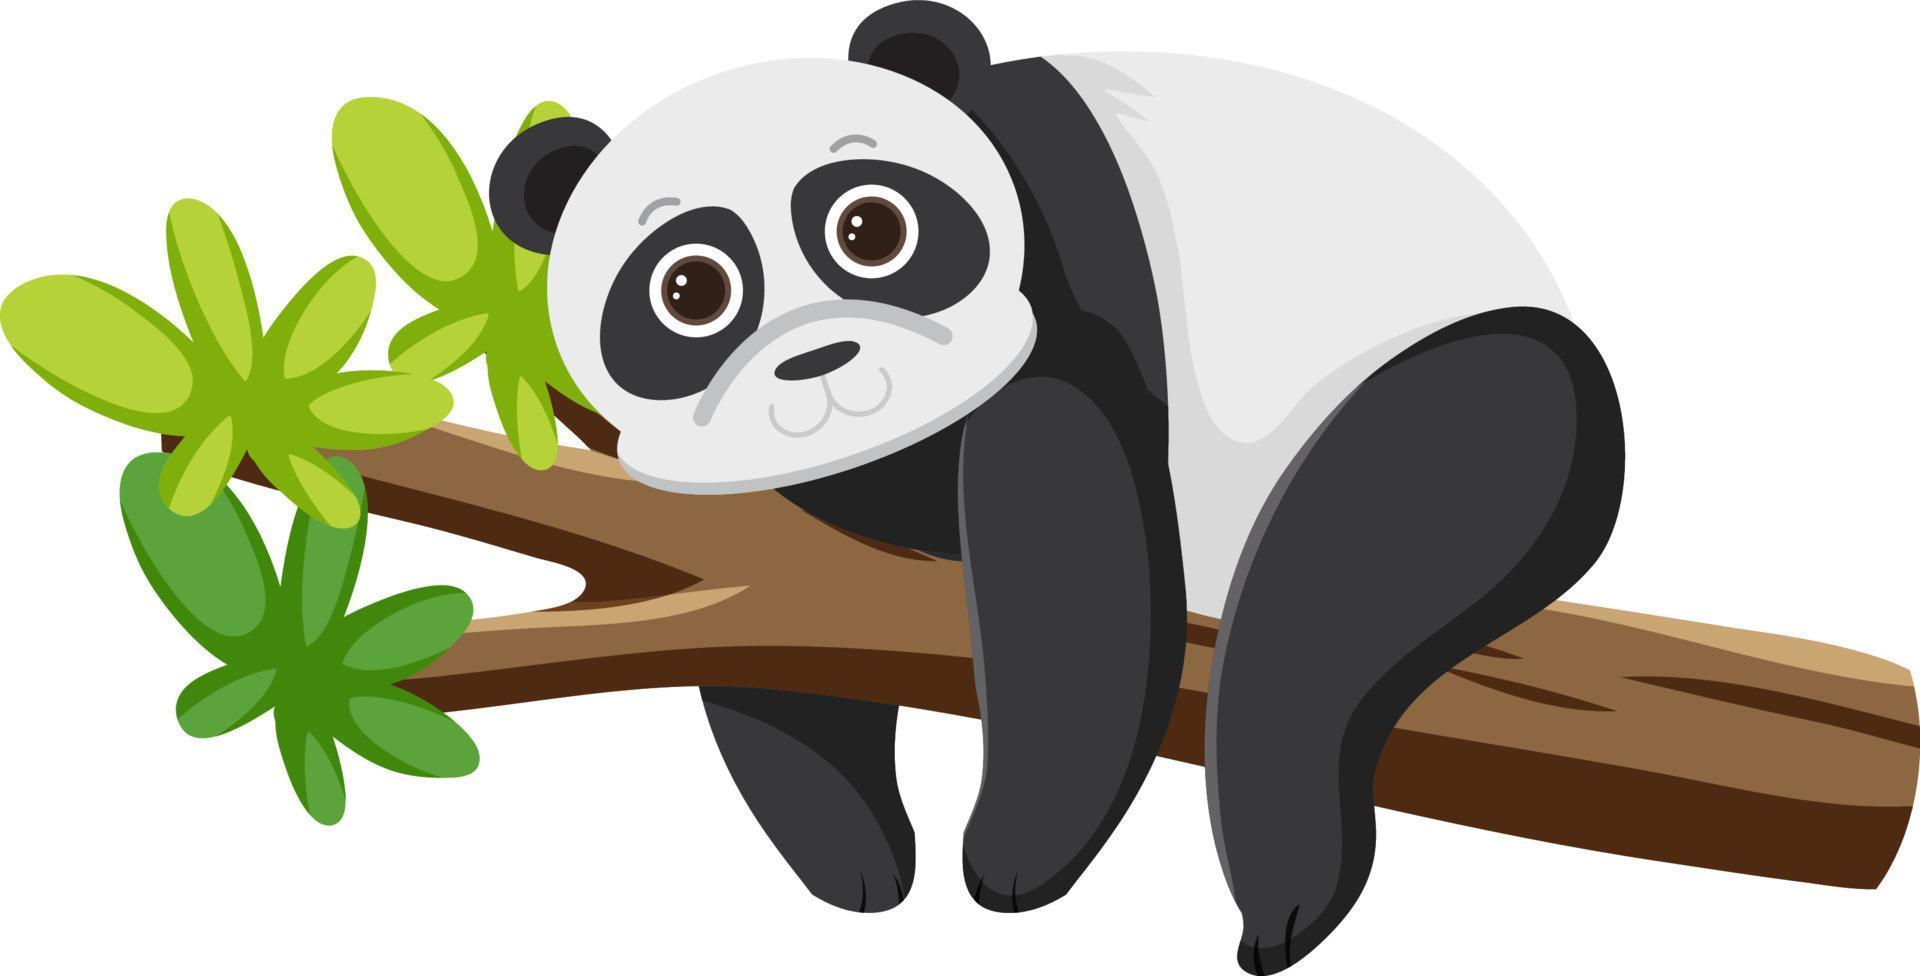 https://static.vecteezy.com/system/resources/previews/008/337/721/non_2x/cute-panda-bear-in-flat-cartoon-style-free-vector.jpg